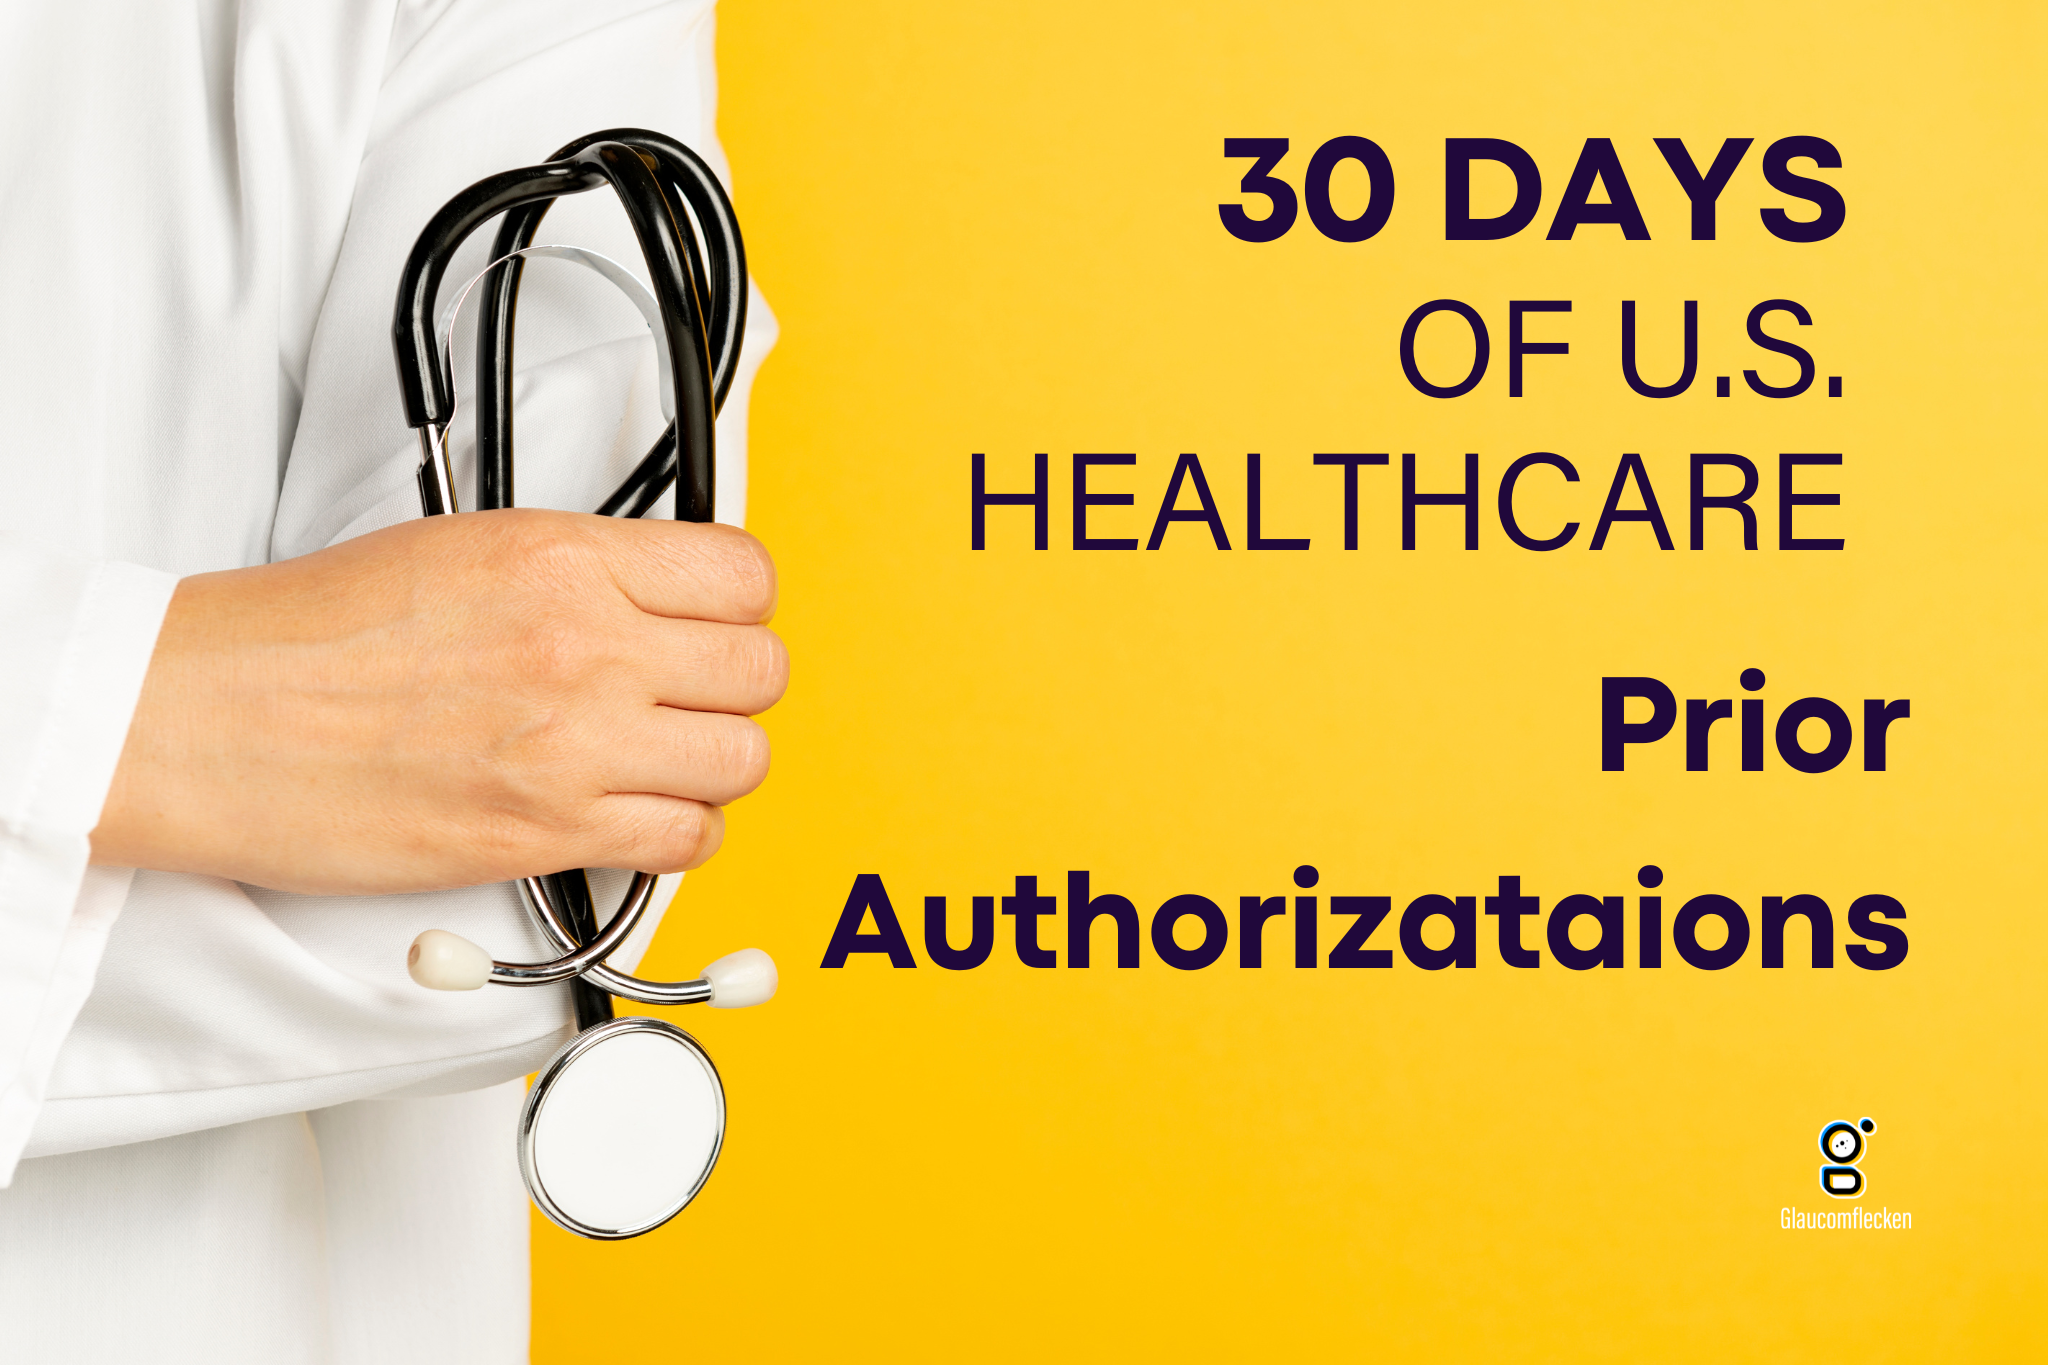 Prior Authorizations: Your Doctor-Recommended Care Denied